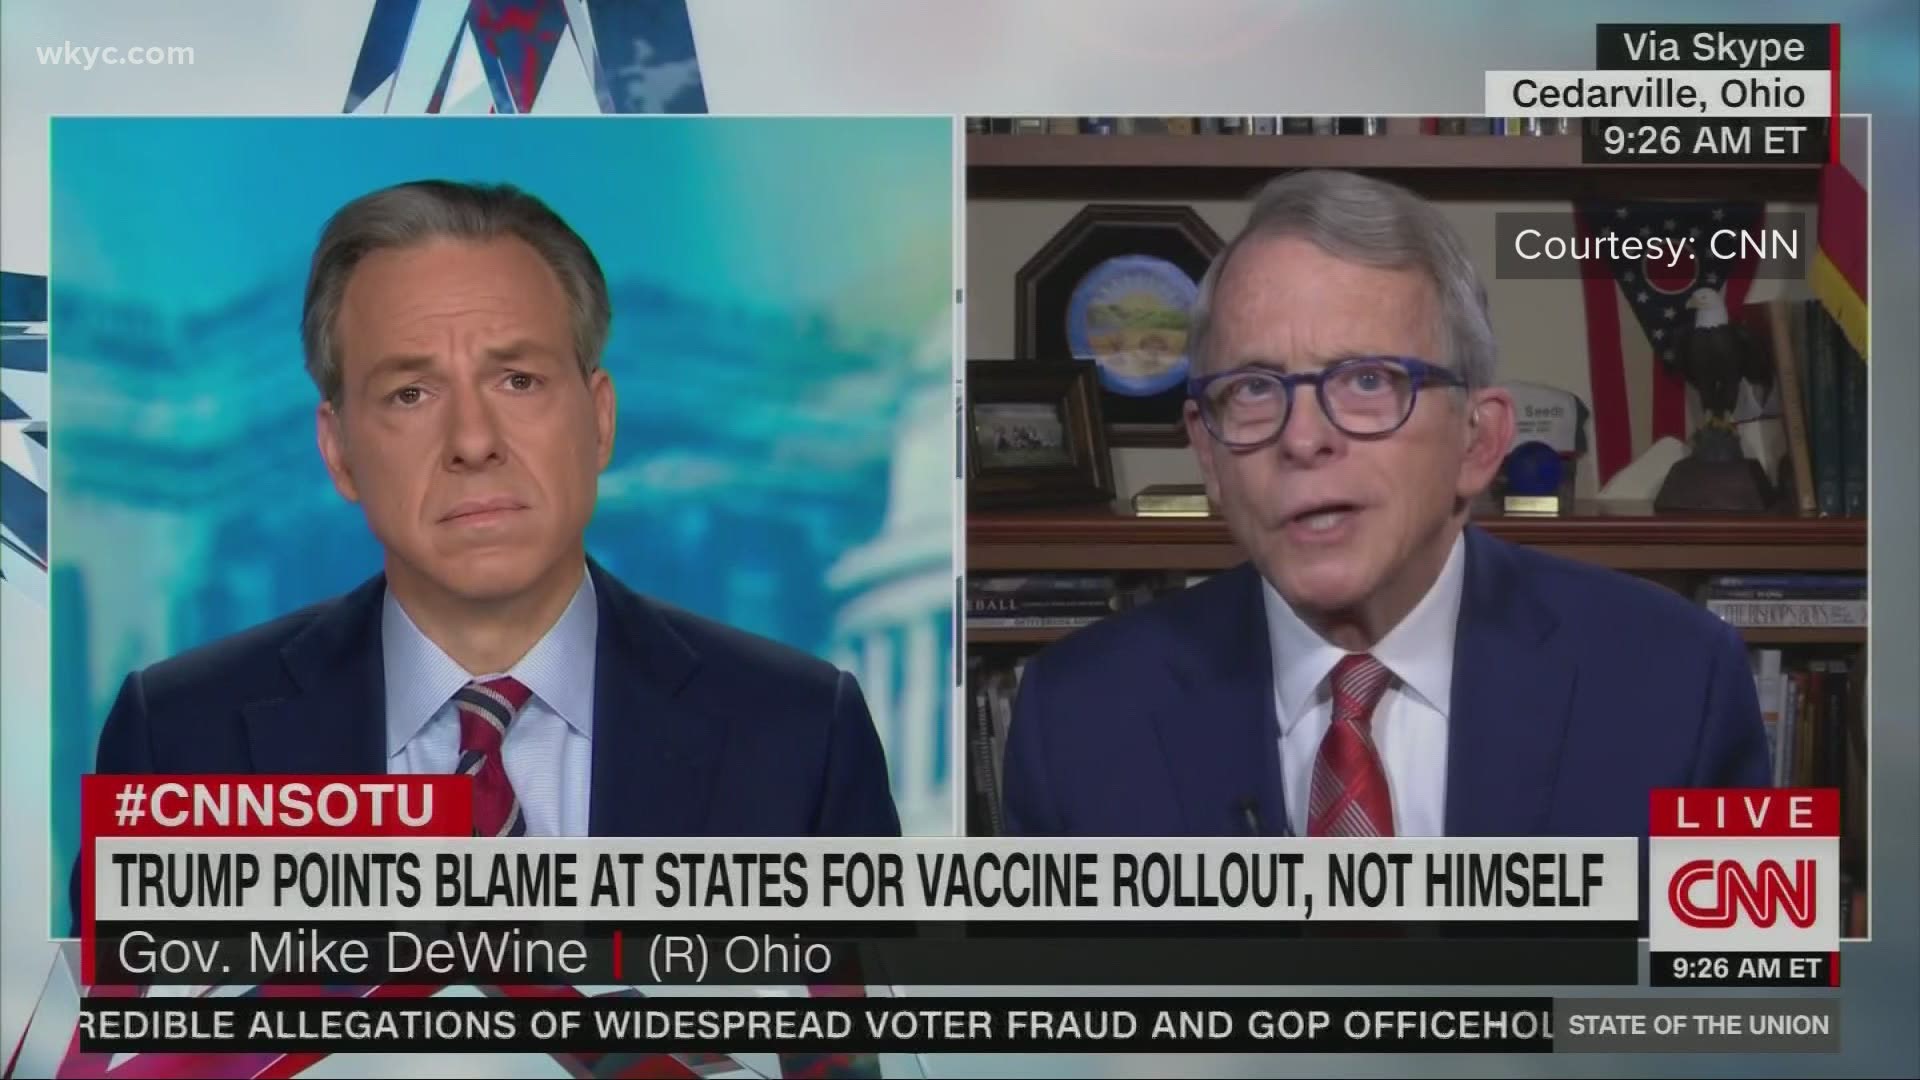 The governor also said he hopes to see in person classes resume by March 1. DeWine made the statements during Sunday's appearance on "Meet the Press."